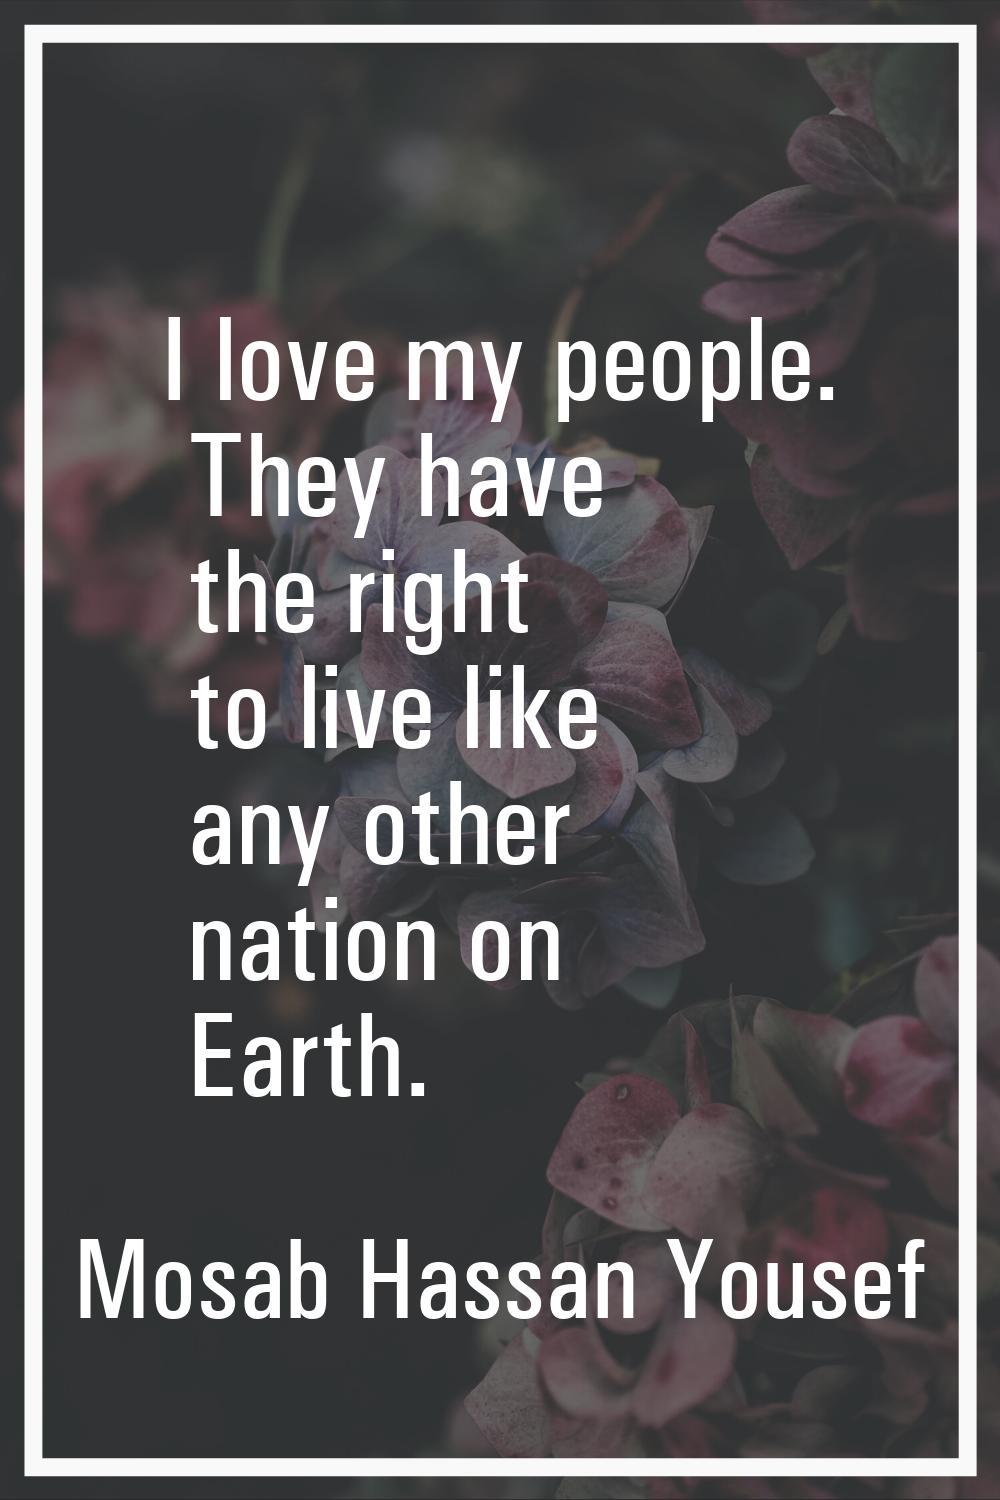 I love my people. They have the right to live like any other nation on Earth.